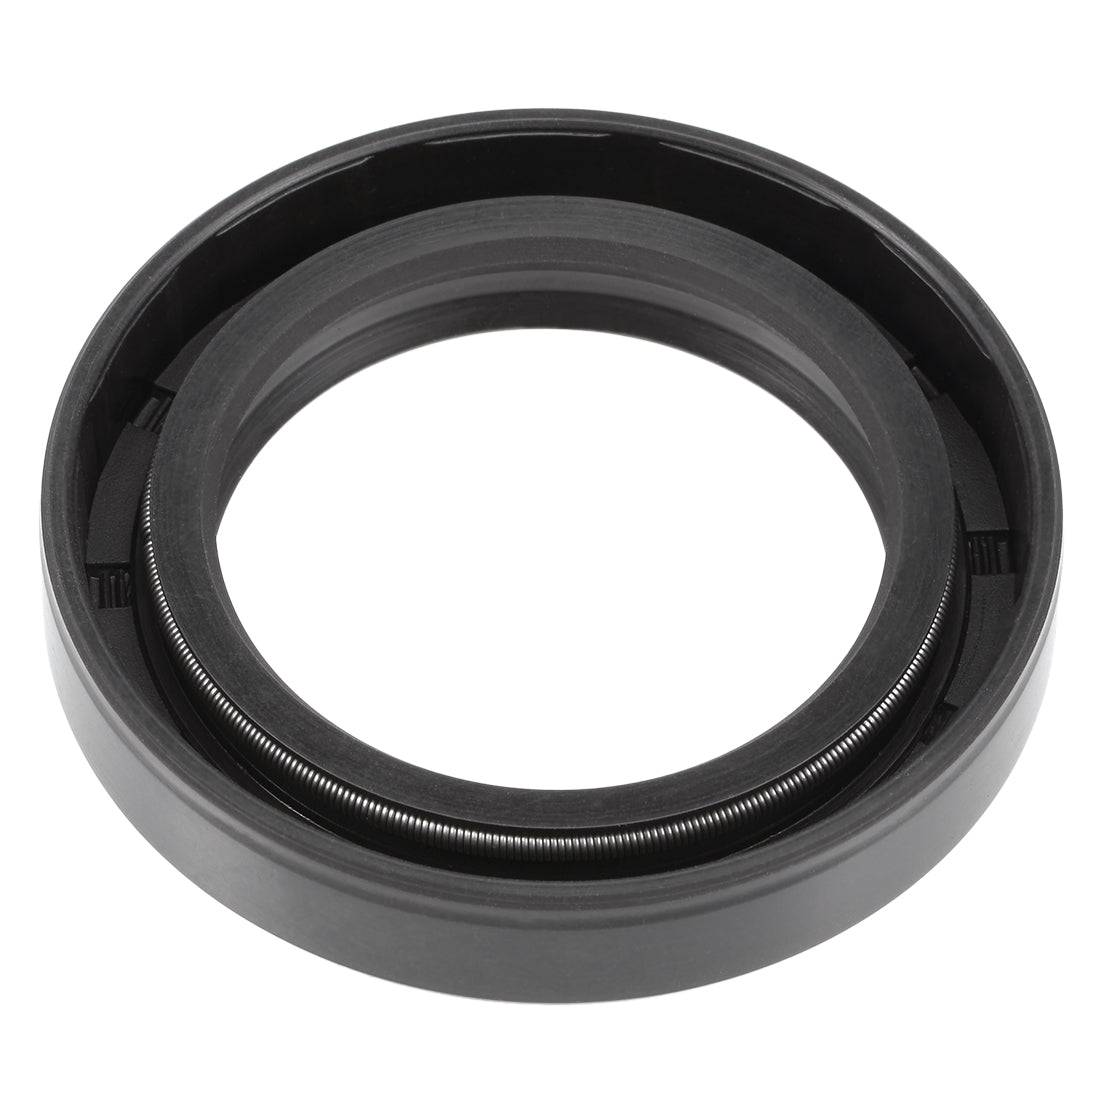 Uxcell Uxcell Oil Seal, TC 38mm x 58mm x 10mm, Nitrile Rubber Cover Double Lip